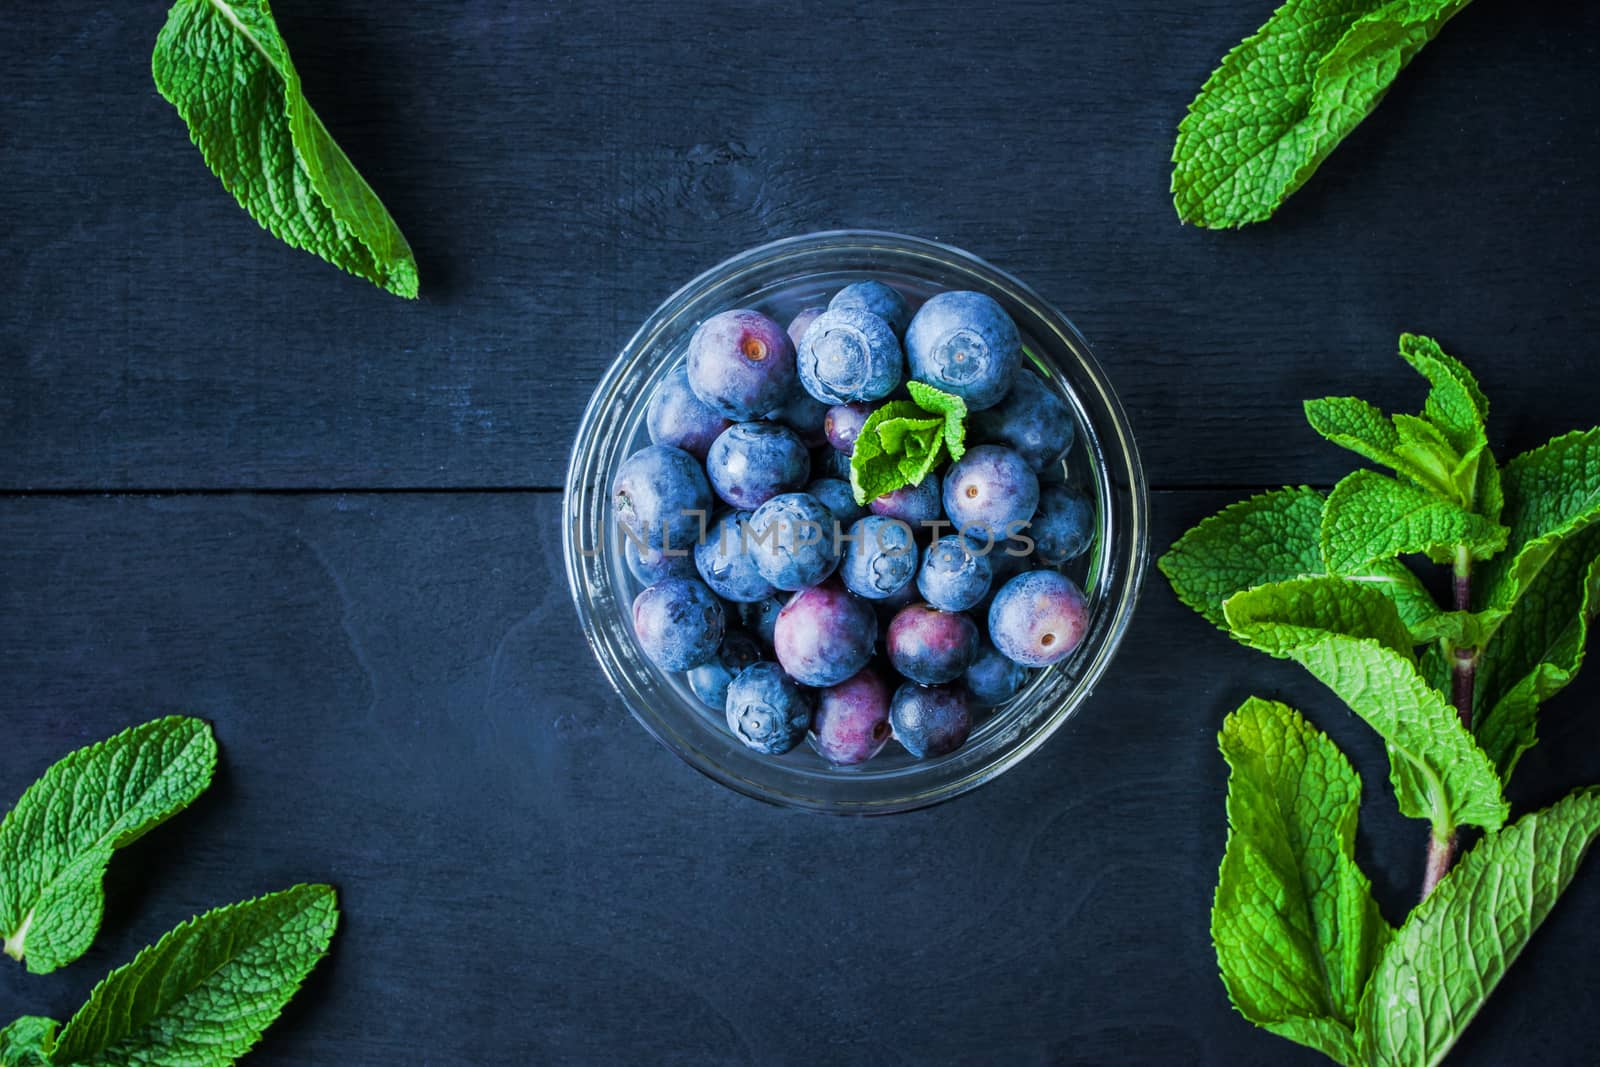 Blueberry with mint in a glass bowl on the blue wooden table